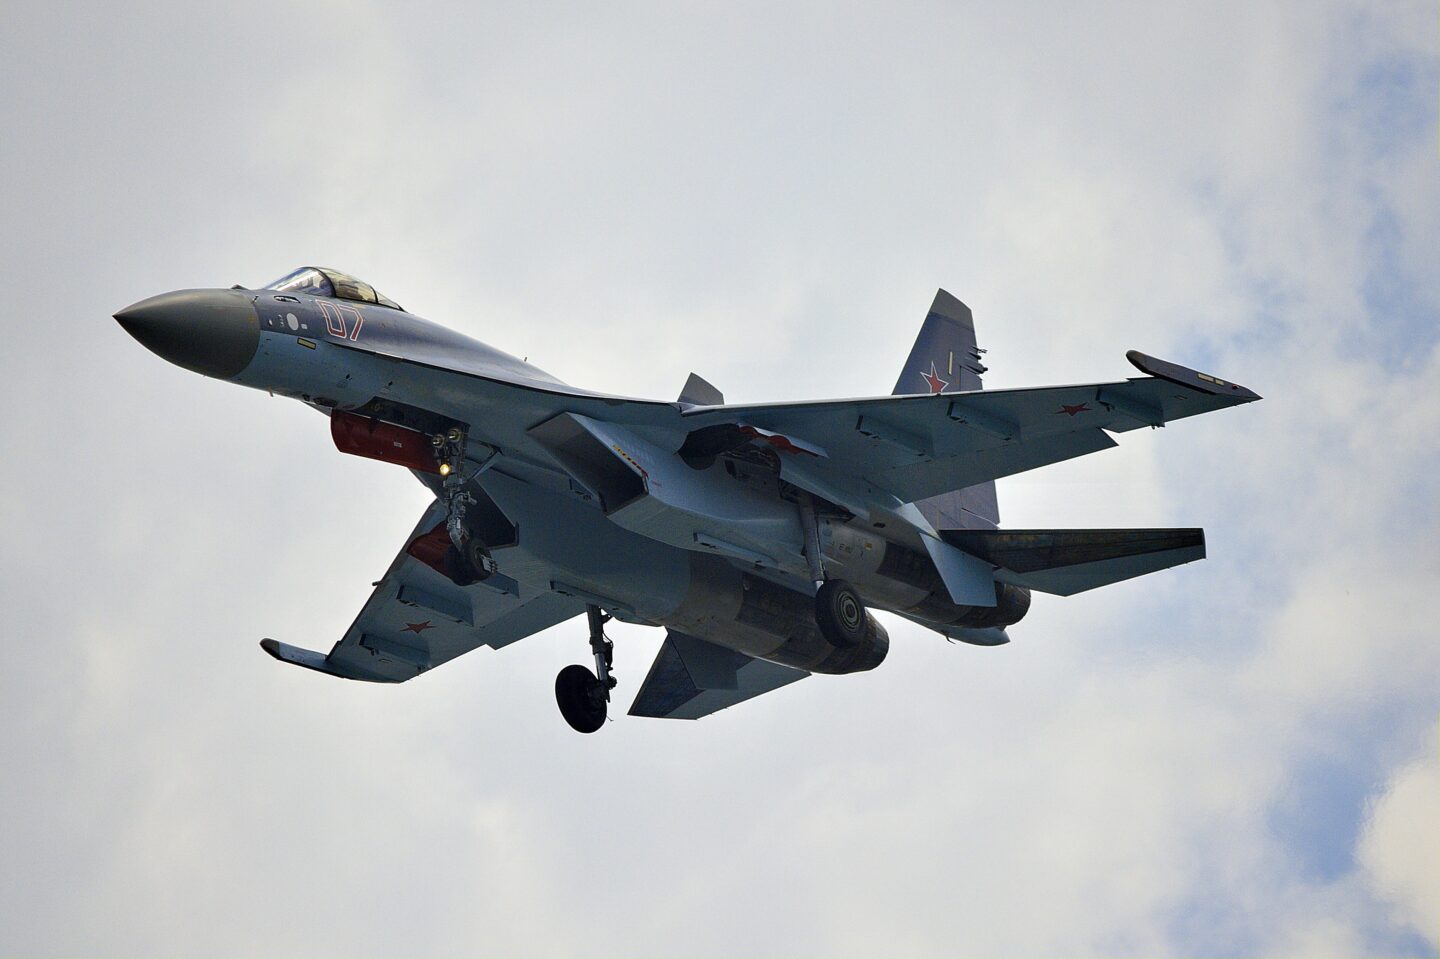 The threat to Russia and China: thanks to Ukraine, Western scientists are already analyzing the remains of the SU-35C